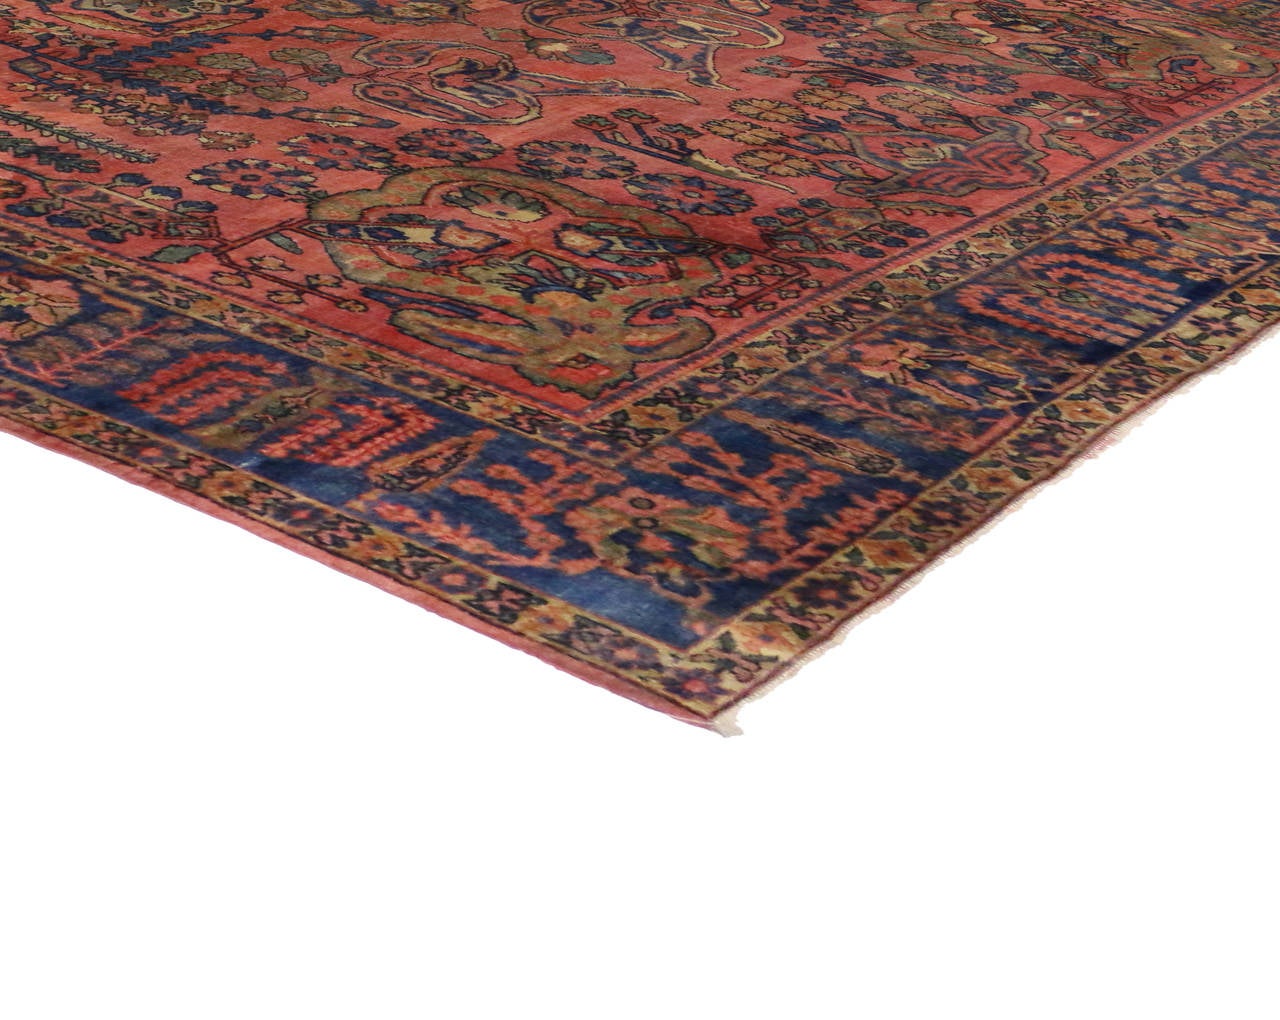 71518 Antique Persian Mahal Area Rug with Cypress and Weeping Willow Trees. Bold yet delicate, this eccentric early 20th century antique Persian Mahal rug offers an opulent cornucopia of lively botanical motifs. With its time-softened colors and